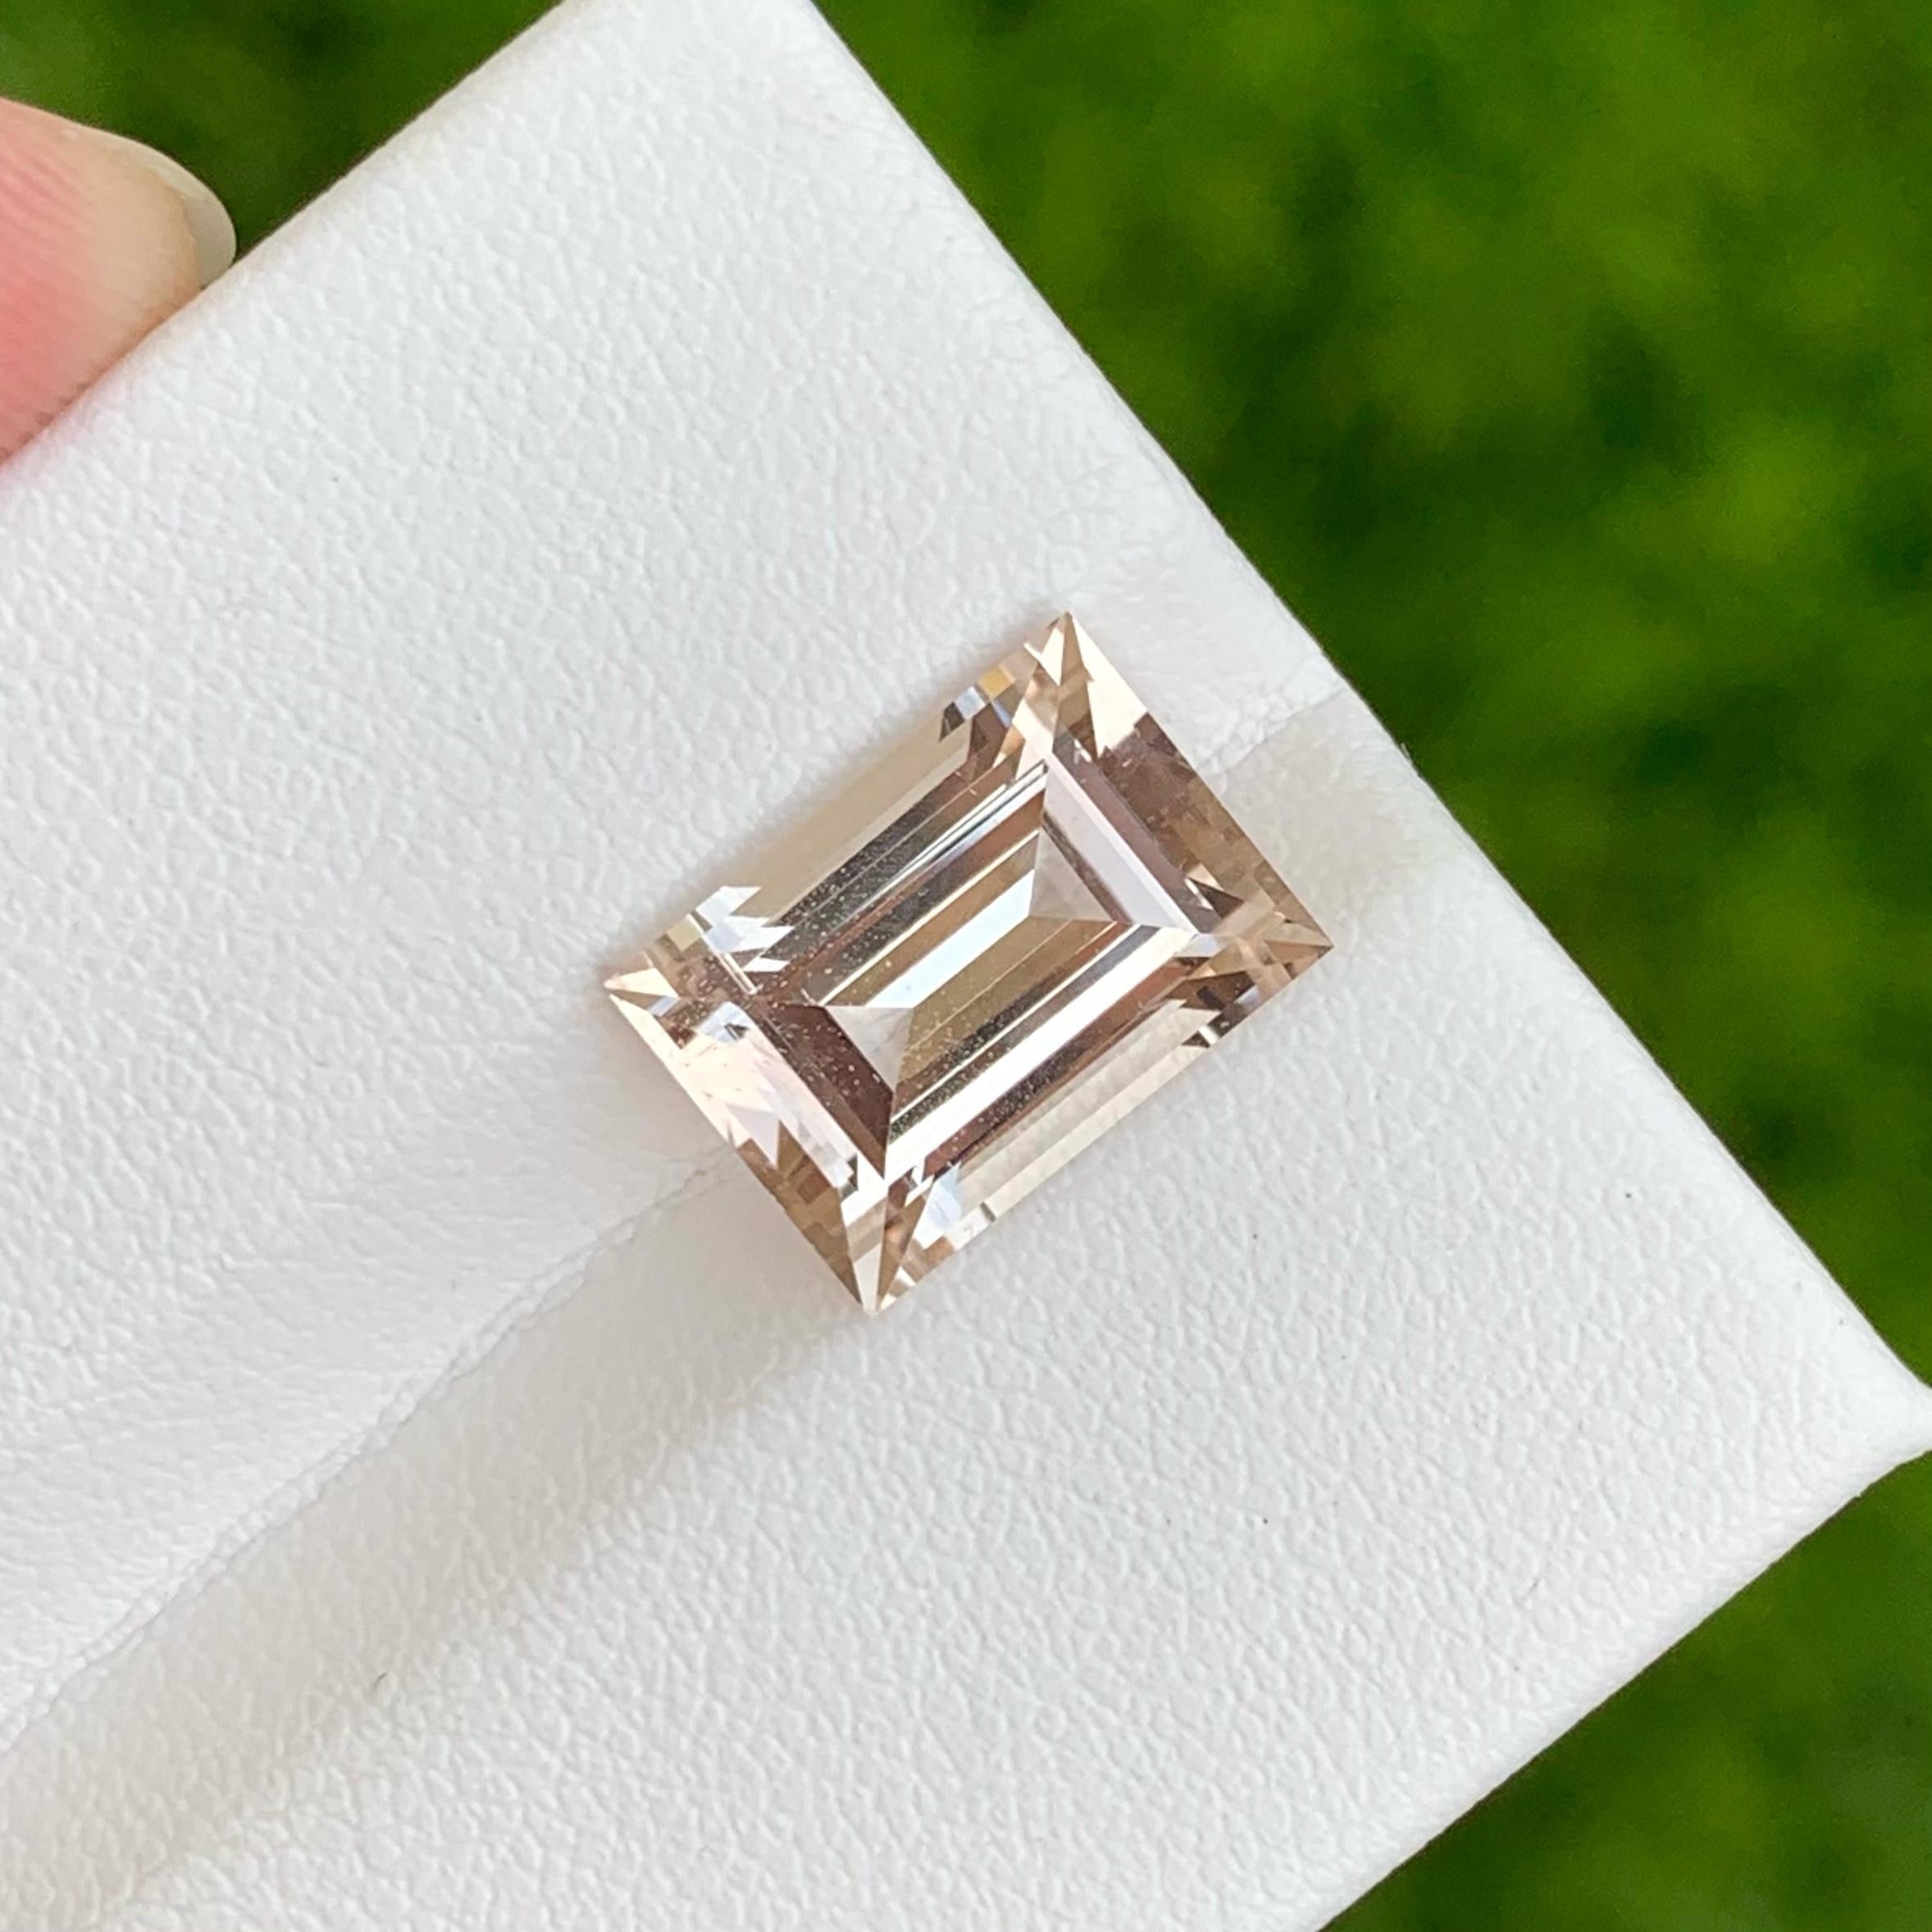 Weight 6.45 carats 
Dimensions 12.4x9.0x6.4 mm
Treatment none 
Origin Pakistan 
Clarity VVS ( Very, Very Slightly Included)
Shape Rectangular 
Cut Baguette

Indulge in the mesmerizing allure of soft golden color topaz gemstones. These exquisite